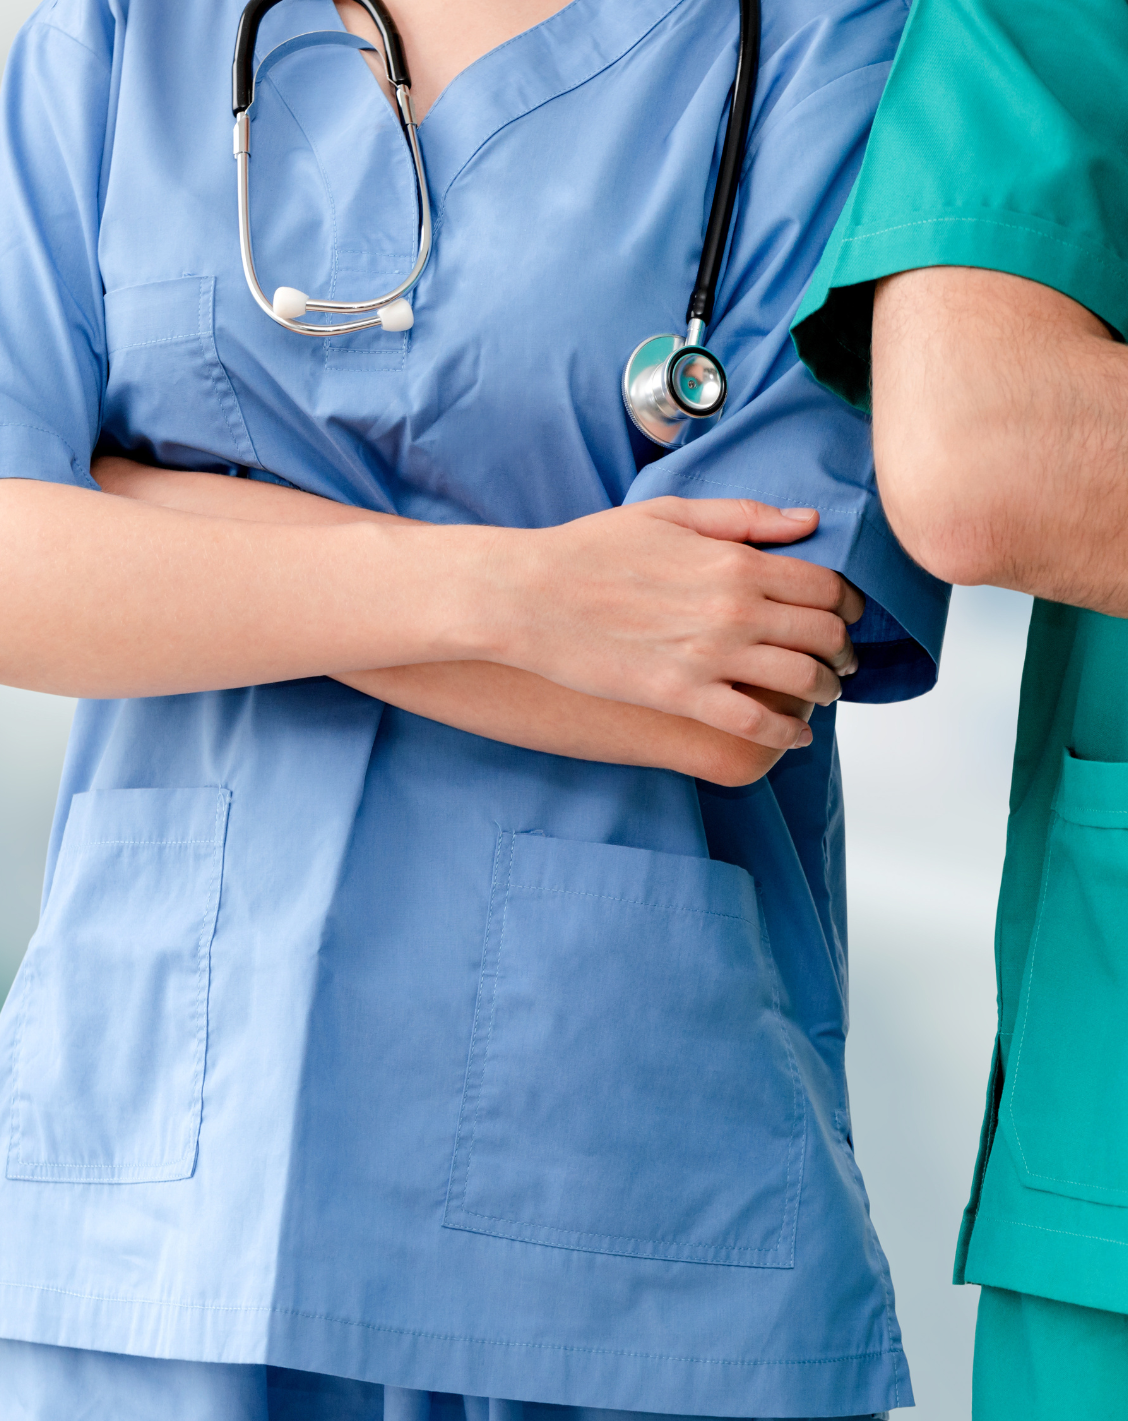 Image showing two healthcare professionals in scrubs, one with a stethoscope, arms crossed, standing confidently.